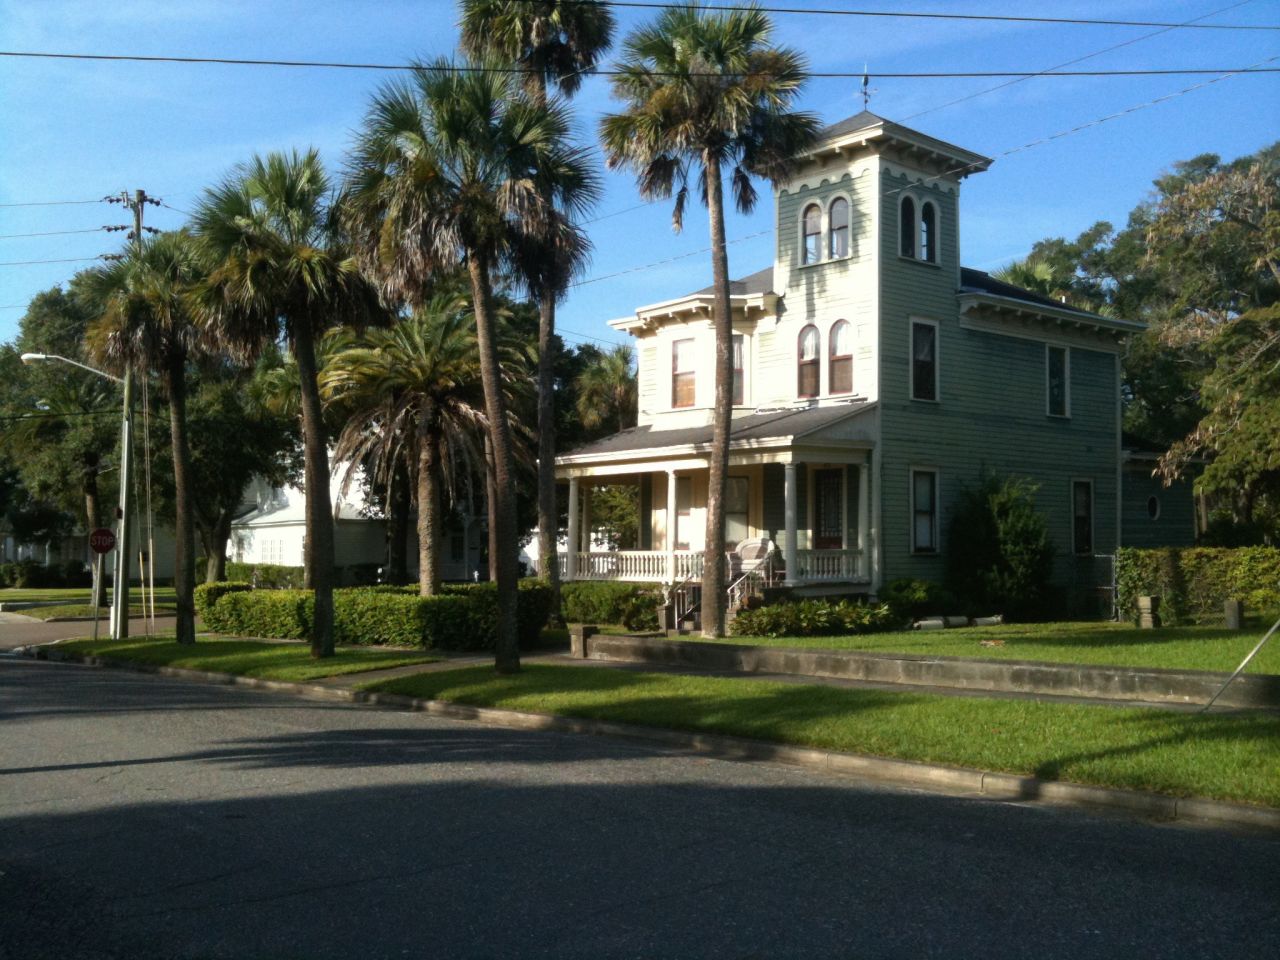 The homes along Sixth Street in downtown Fernandina Beach, part of Amelia Island, are "Old Florida" perfection. 